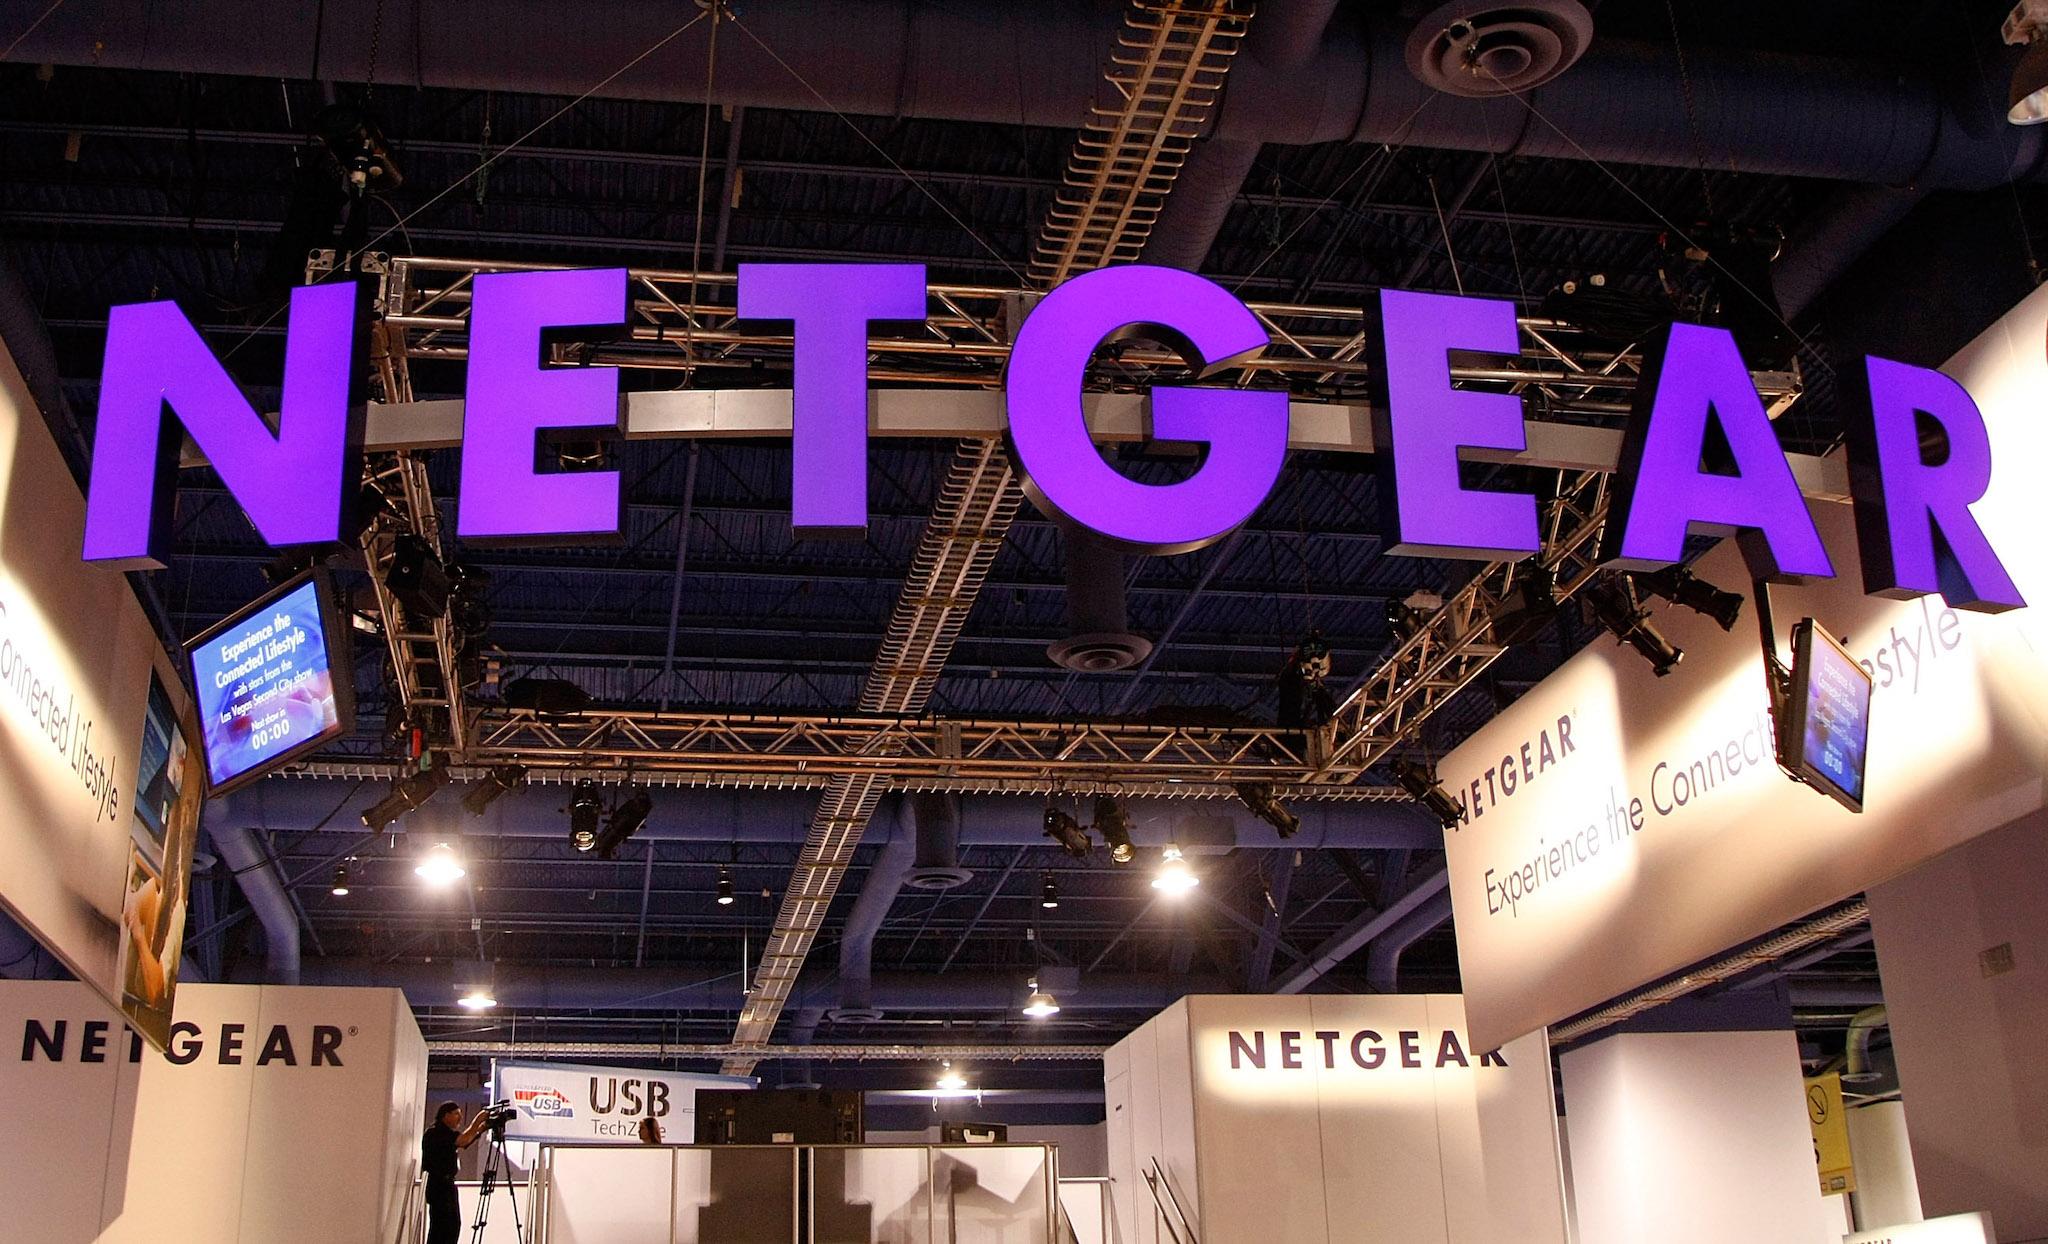 Signage at the Netgear booth is seen at the company's booth at the 2009 International Consumer Electronics Show at the Las Vegas Convention Center